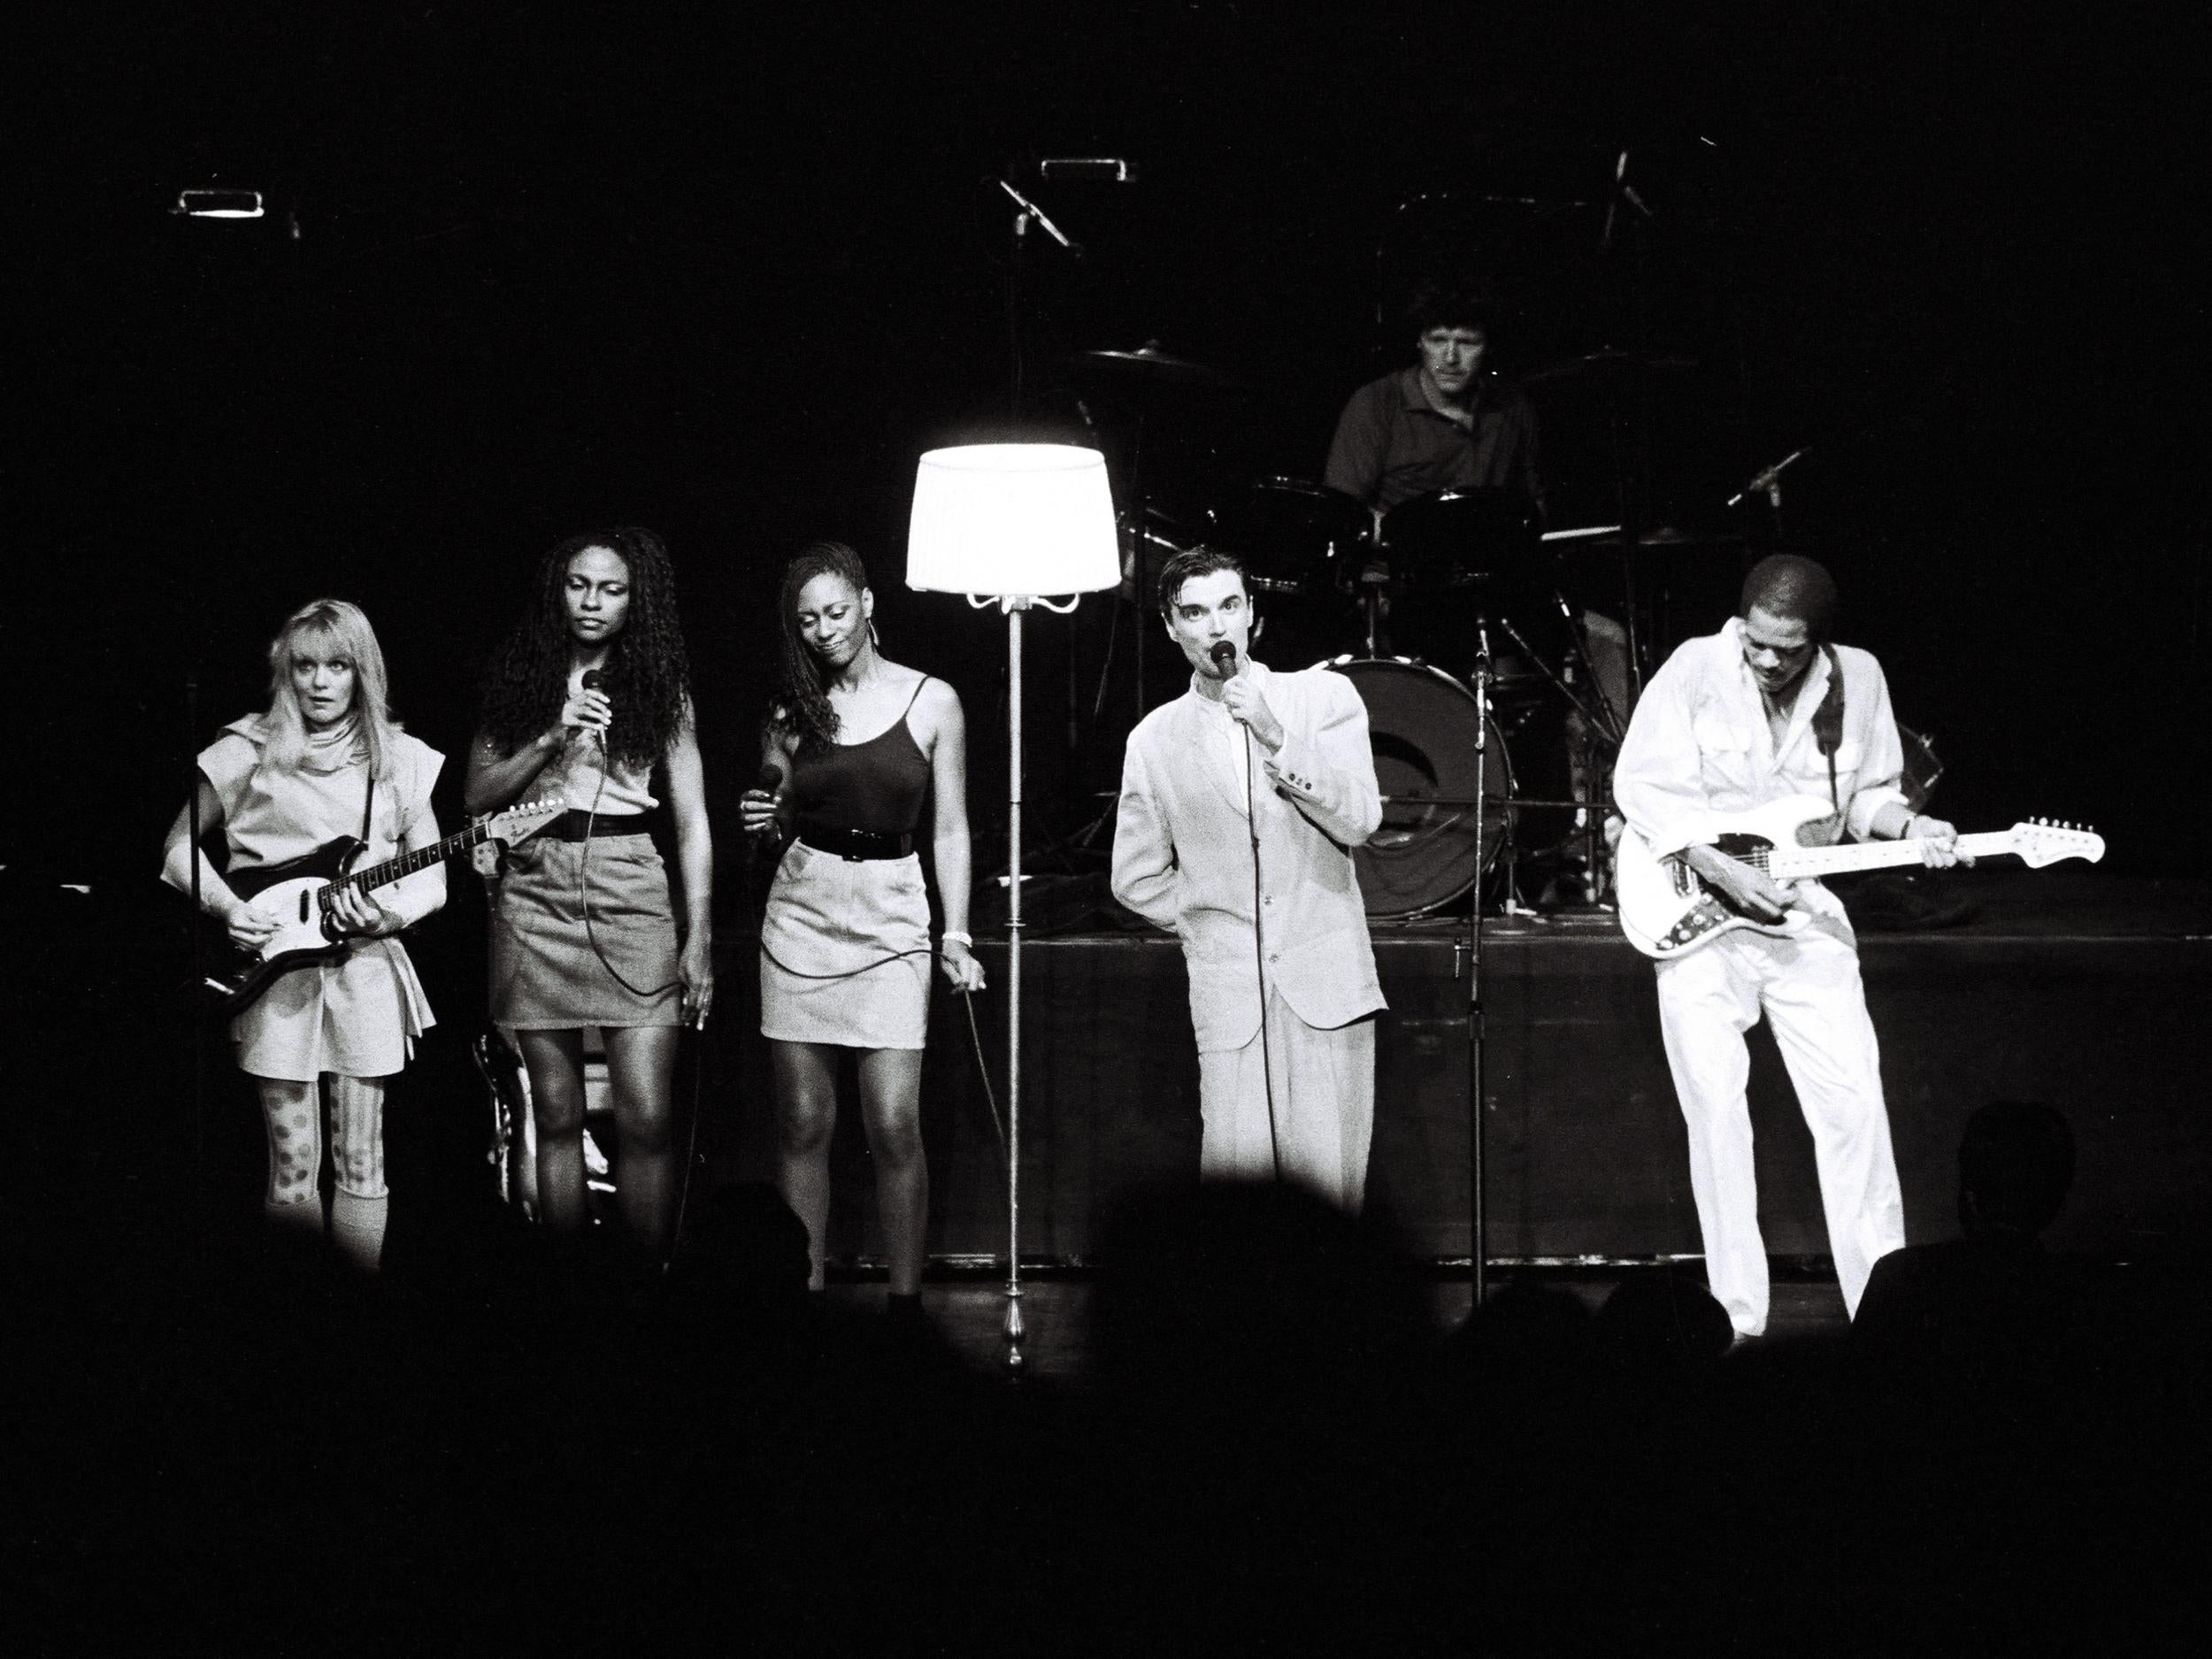 Talking Heads hits included “Psycho Killer” and “Burning Down the House” before Byrne went solo